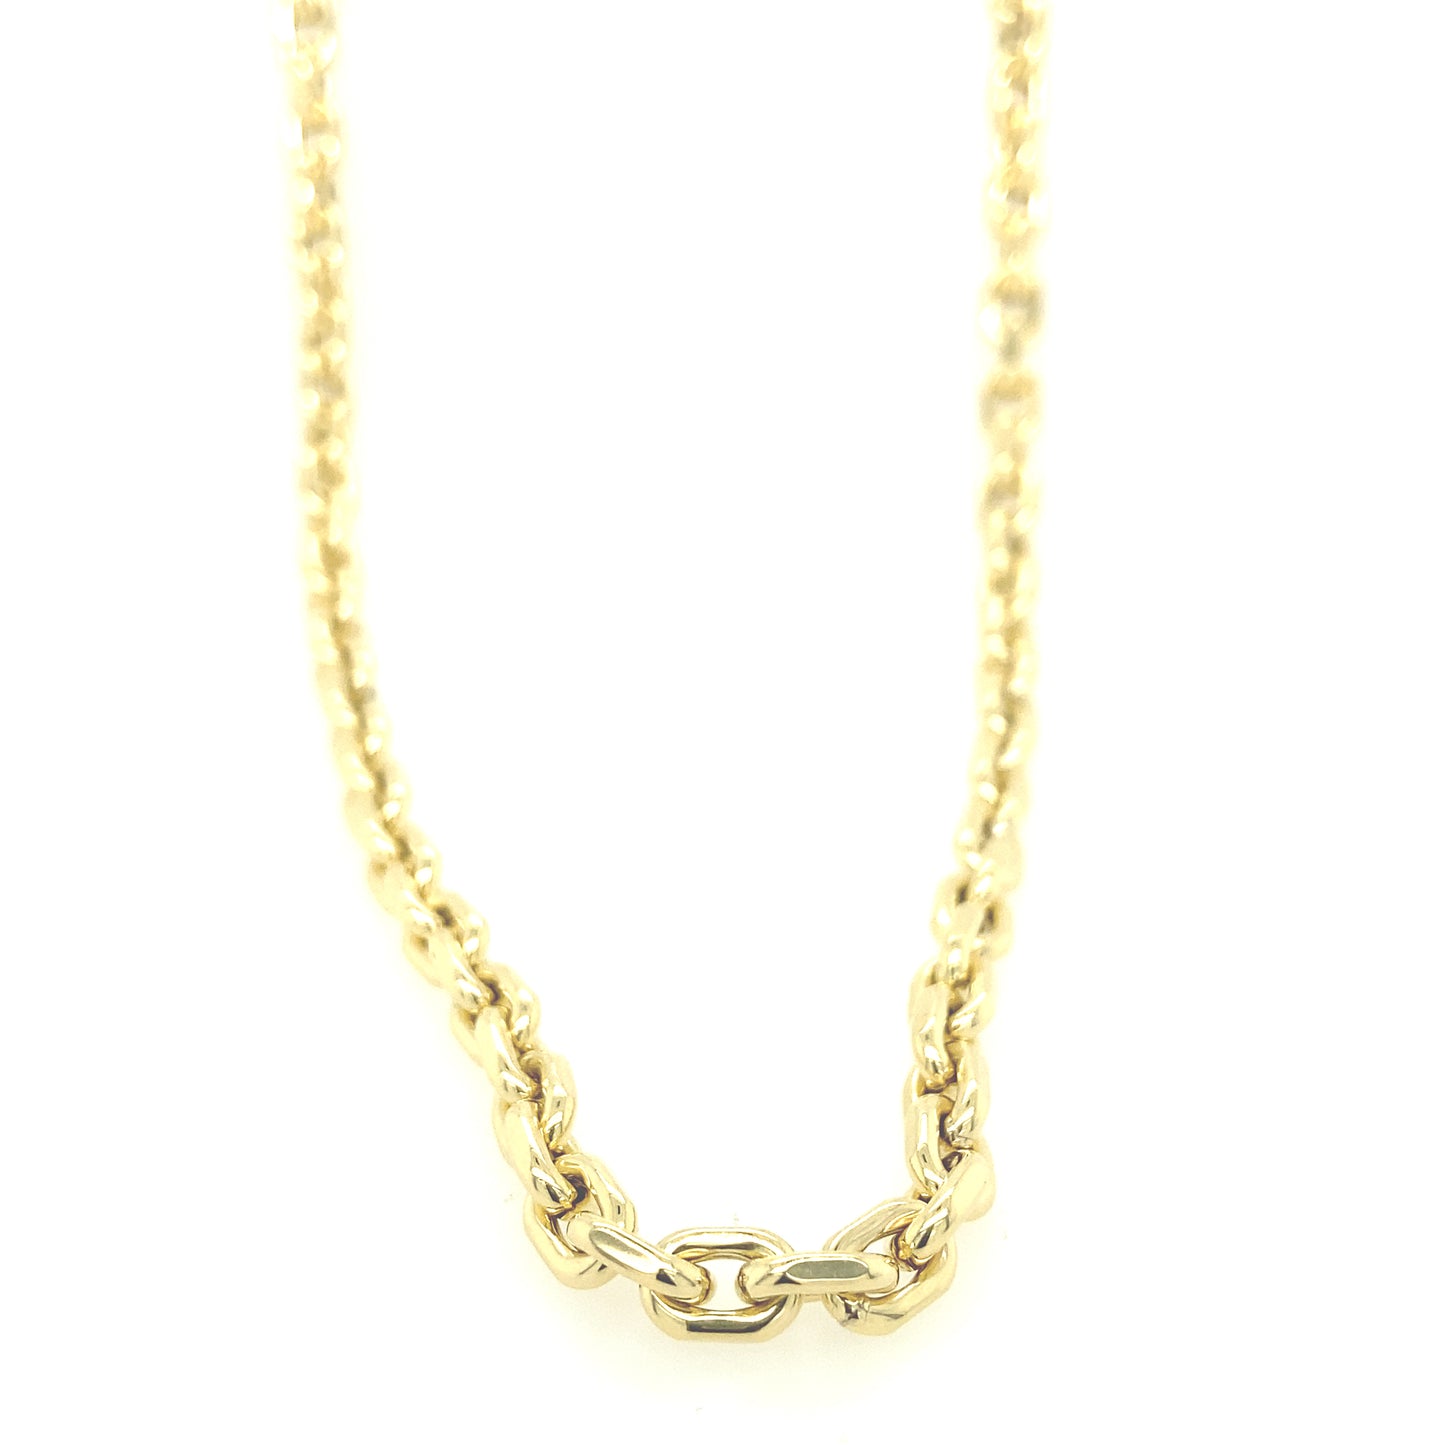 14k Gold Fancy Link Chain | Luby Gold Collection | Luby 